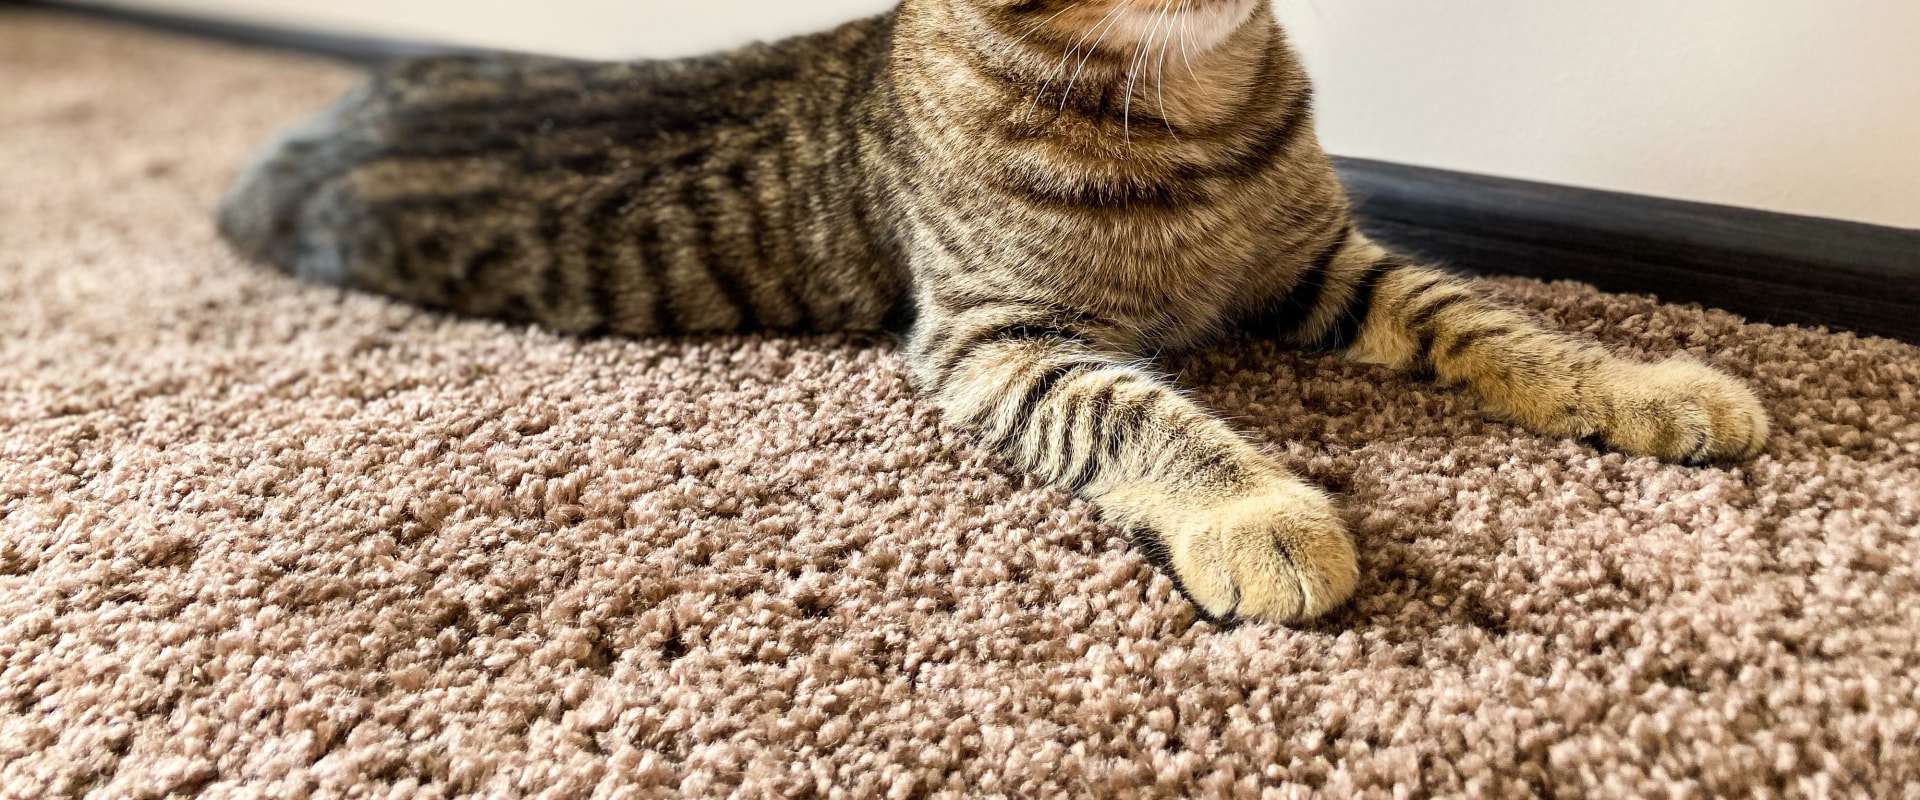 Can professional carpet cleaners get out cat urine?